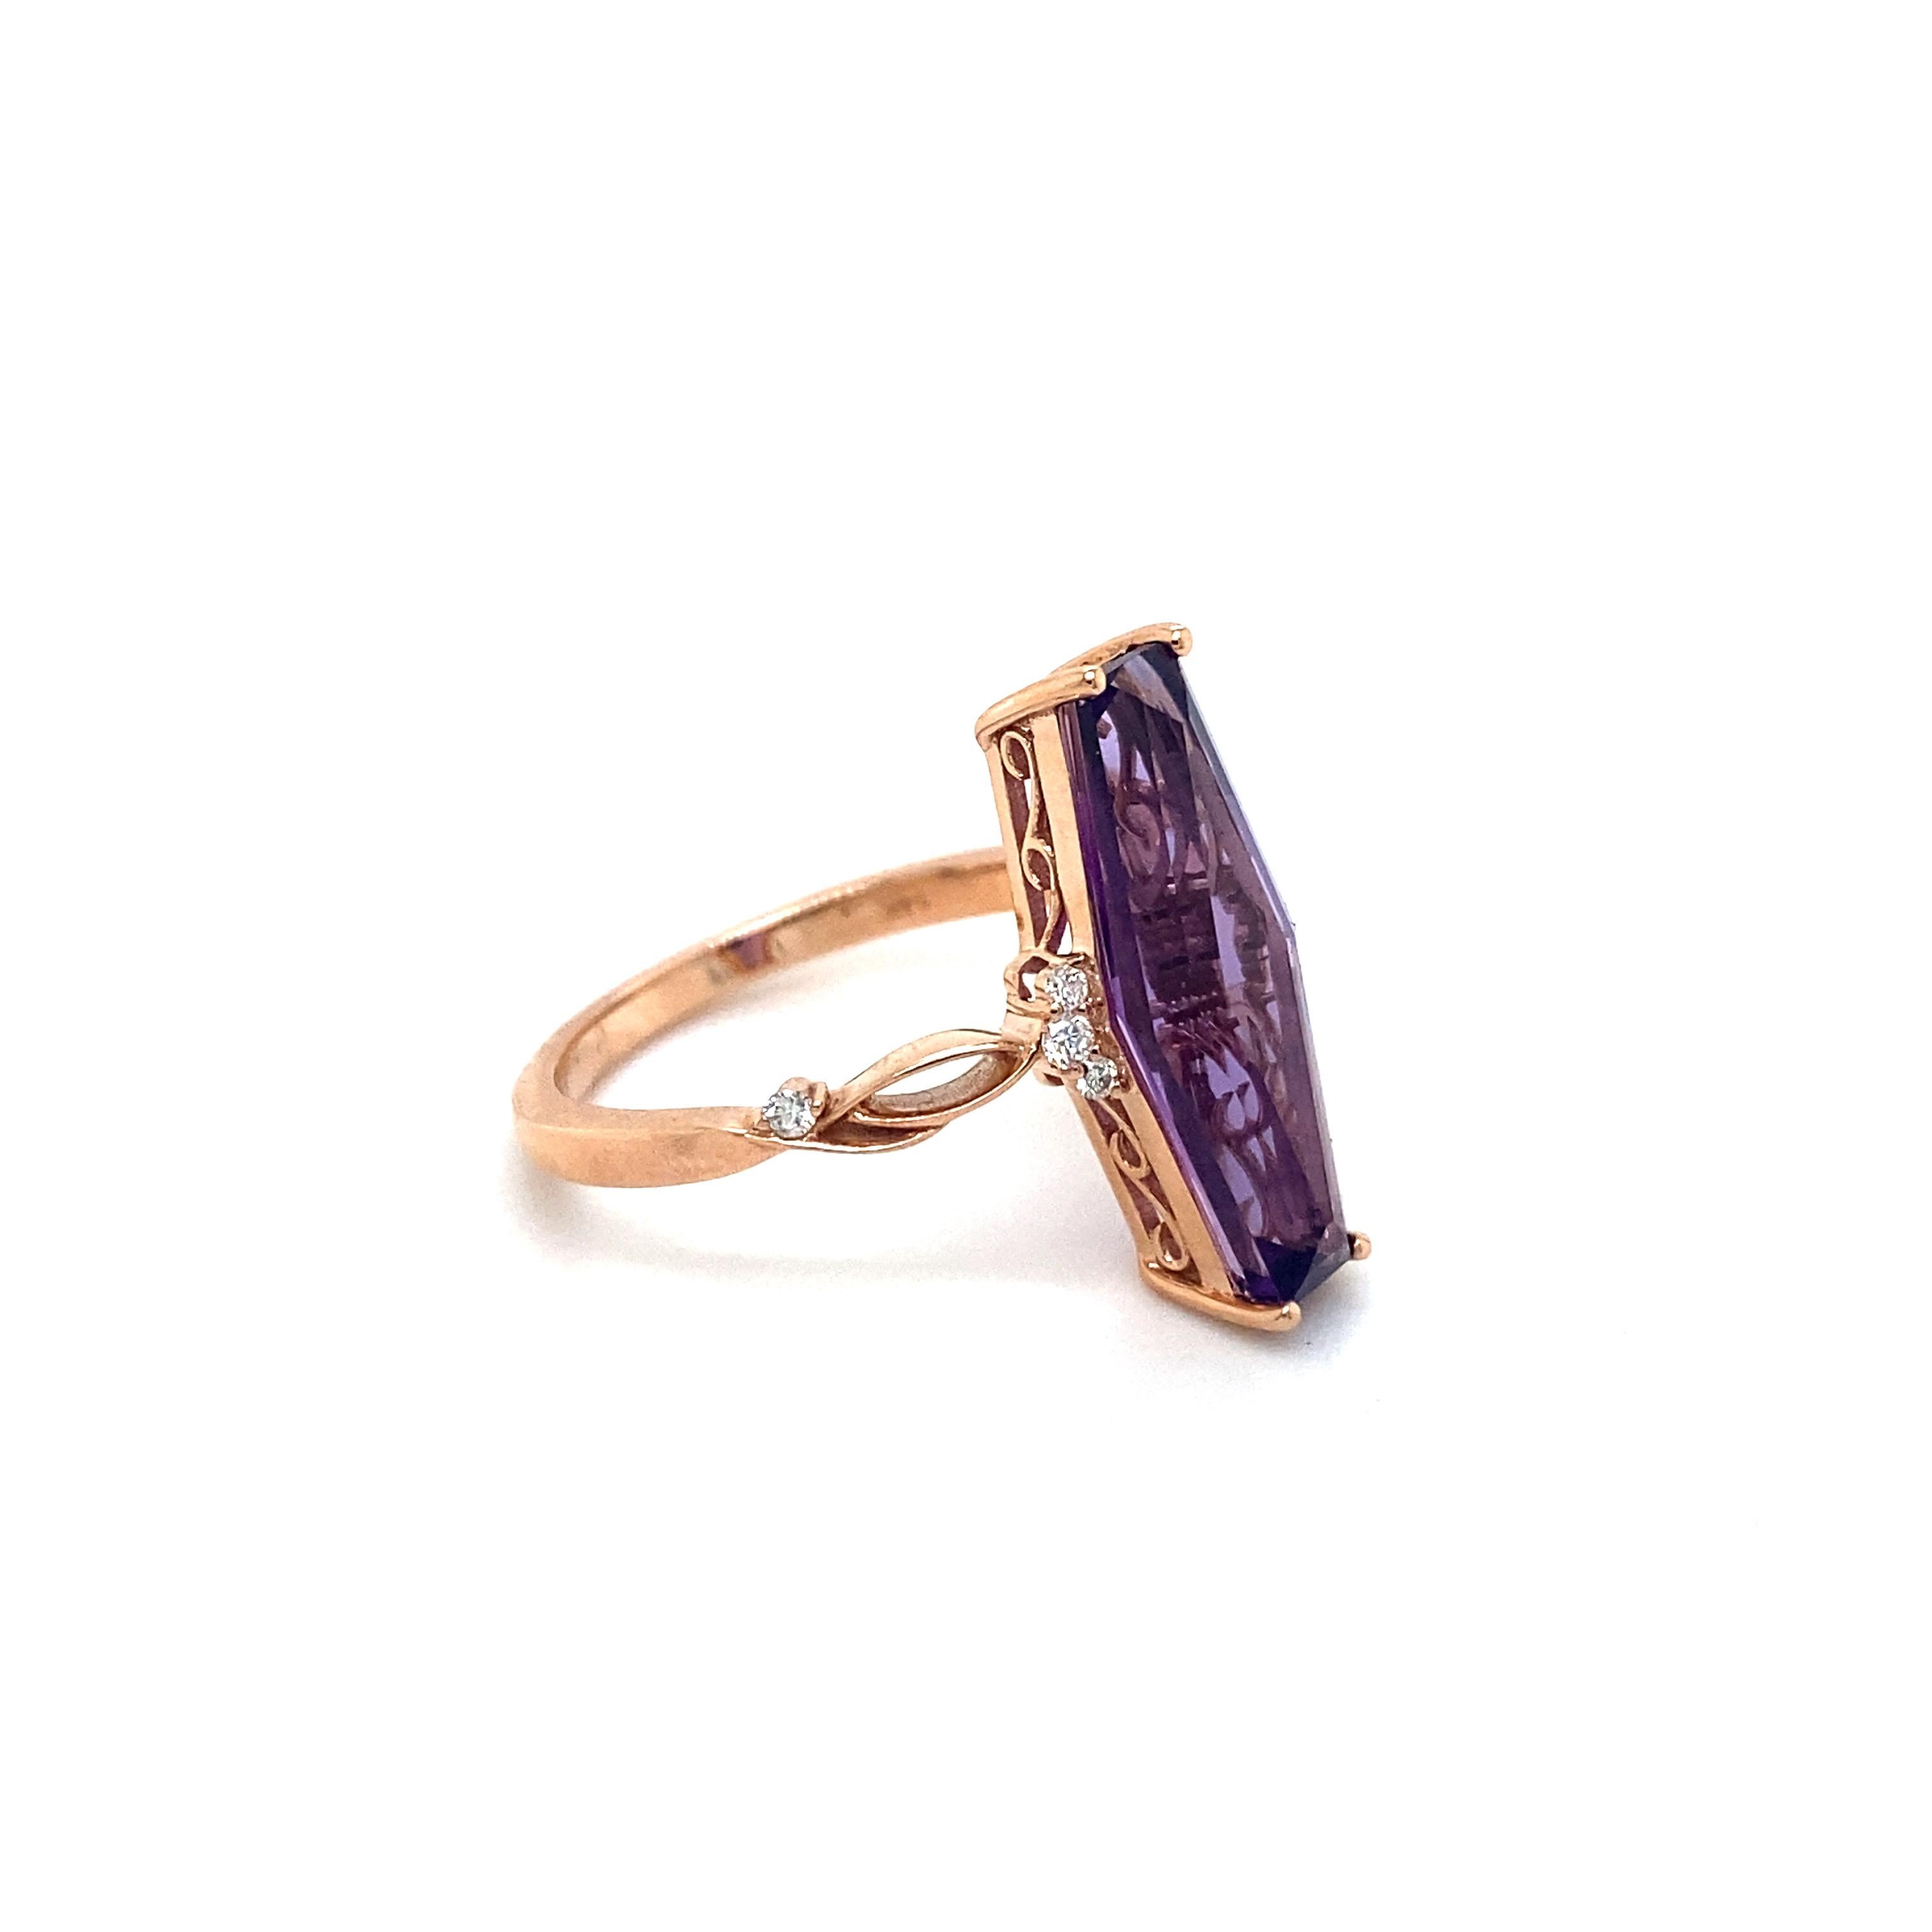 For Sale:  Hexagonal Amethyst Ring with Diamonds 2